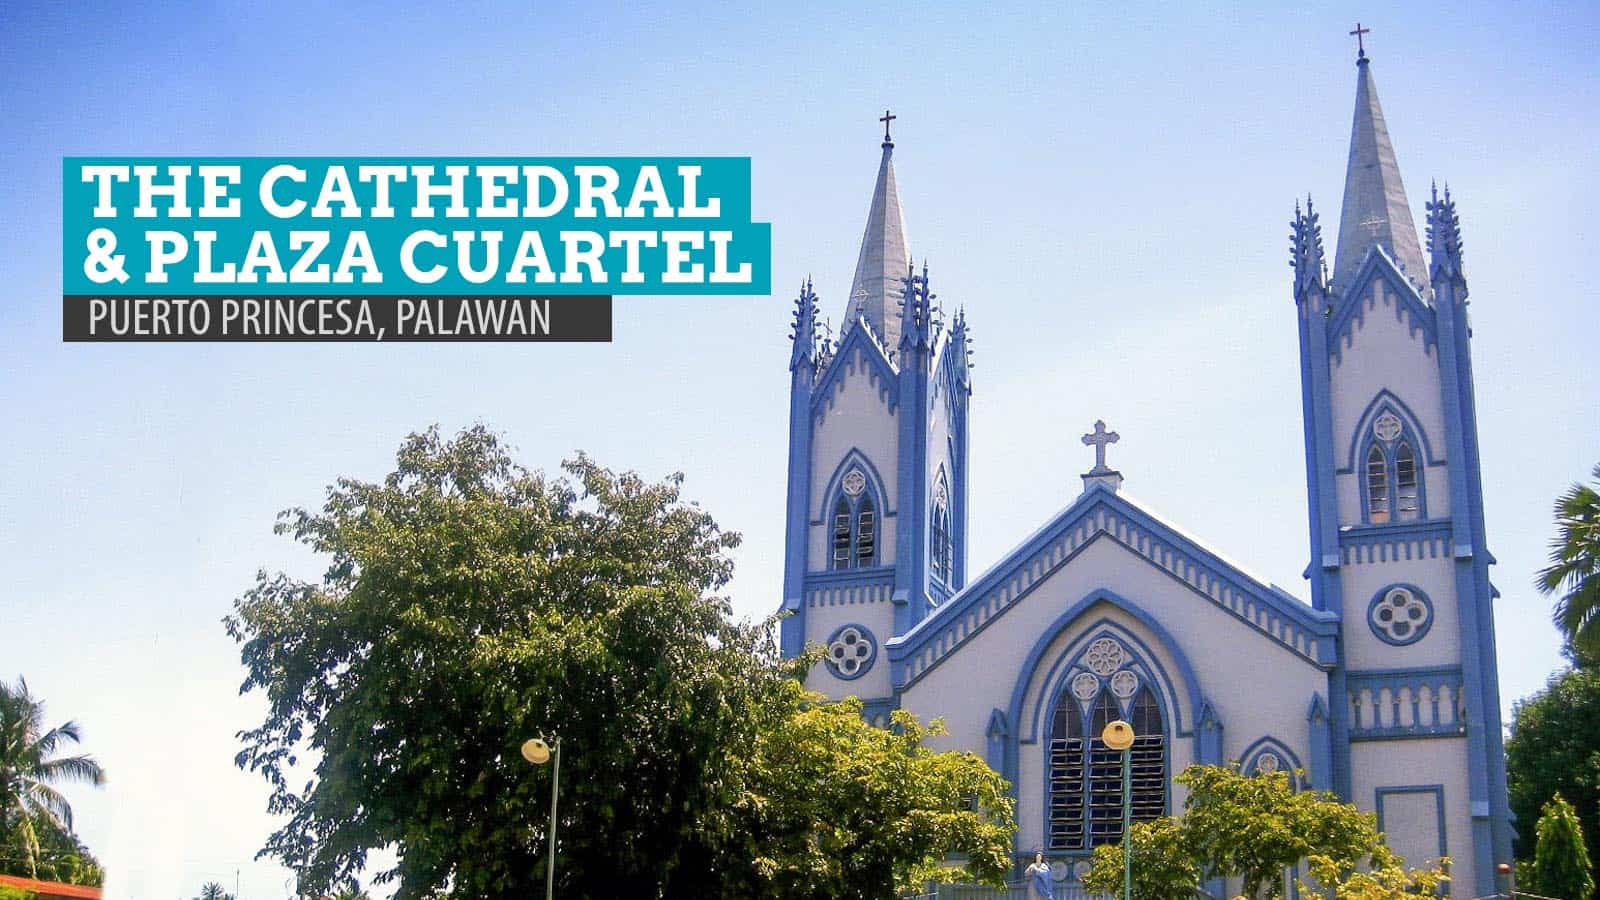 Plaza Cuartel and the Puerto Princesa Cathedral, Palawan, Philippines